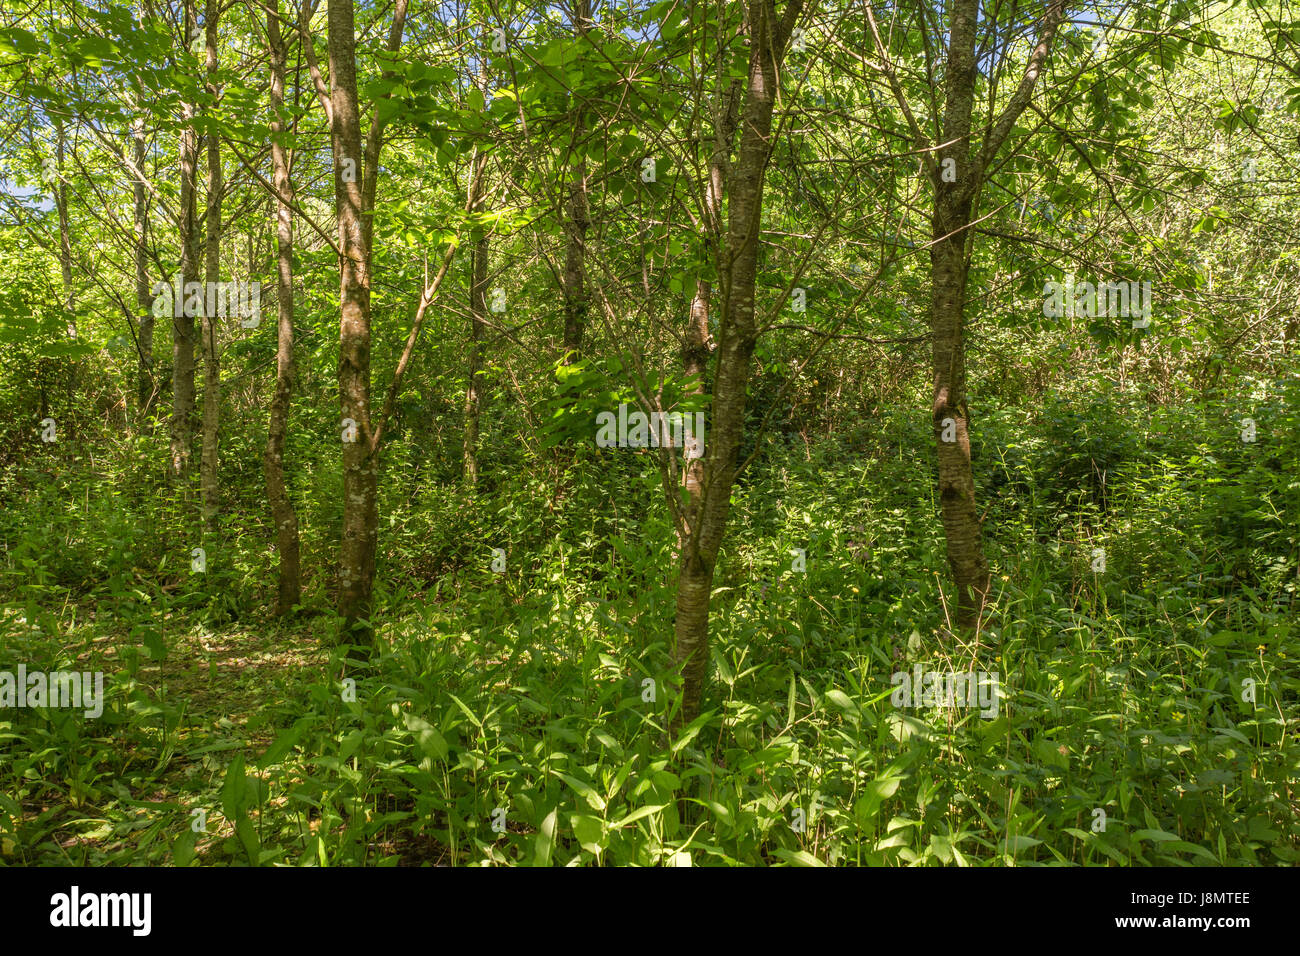 Small woodland glade of trees - typical of early summer in the English countryside and woodlands. Woodland floor. Stock Photo